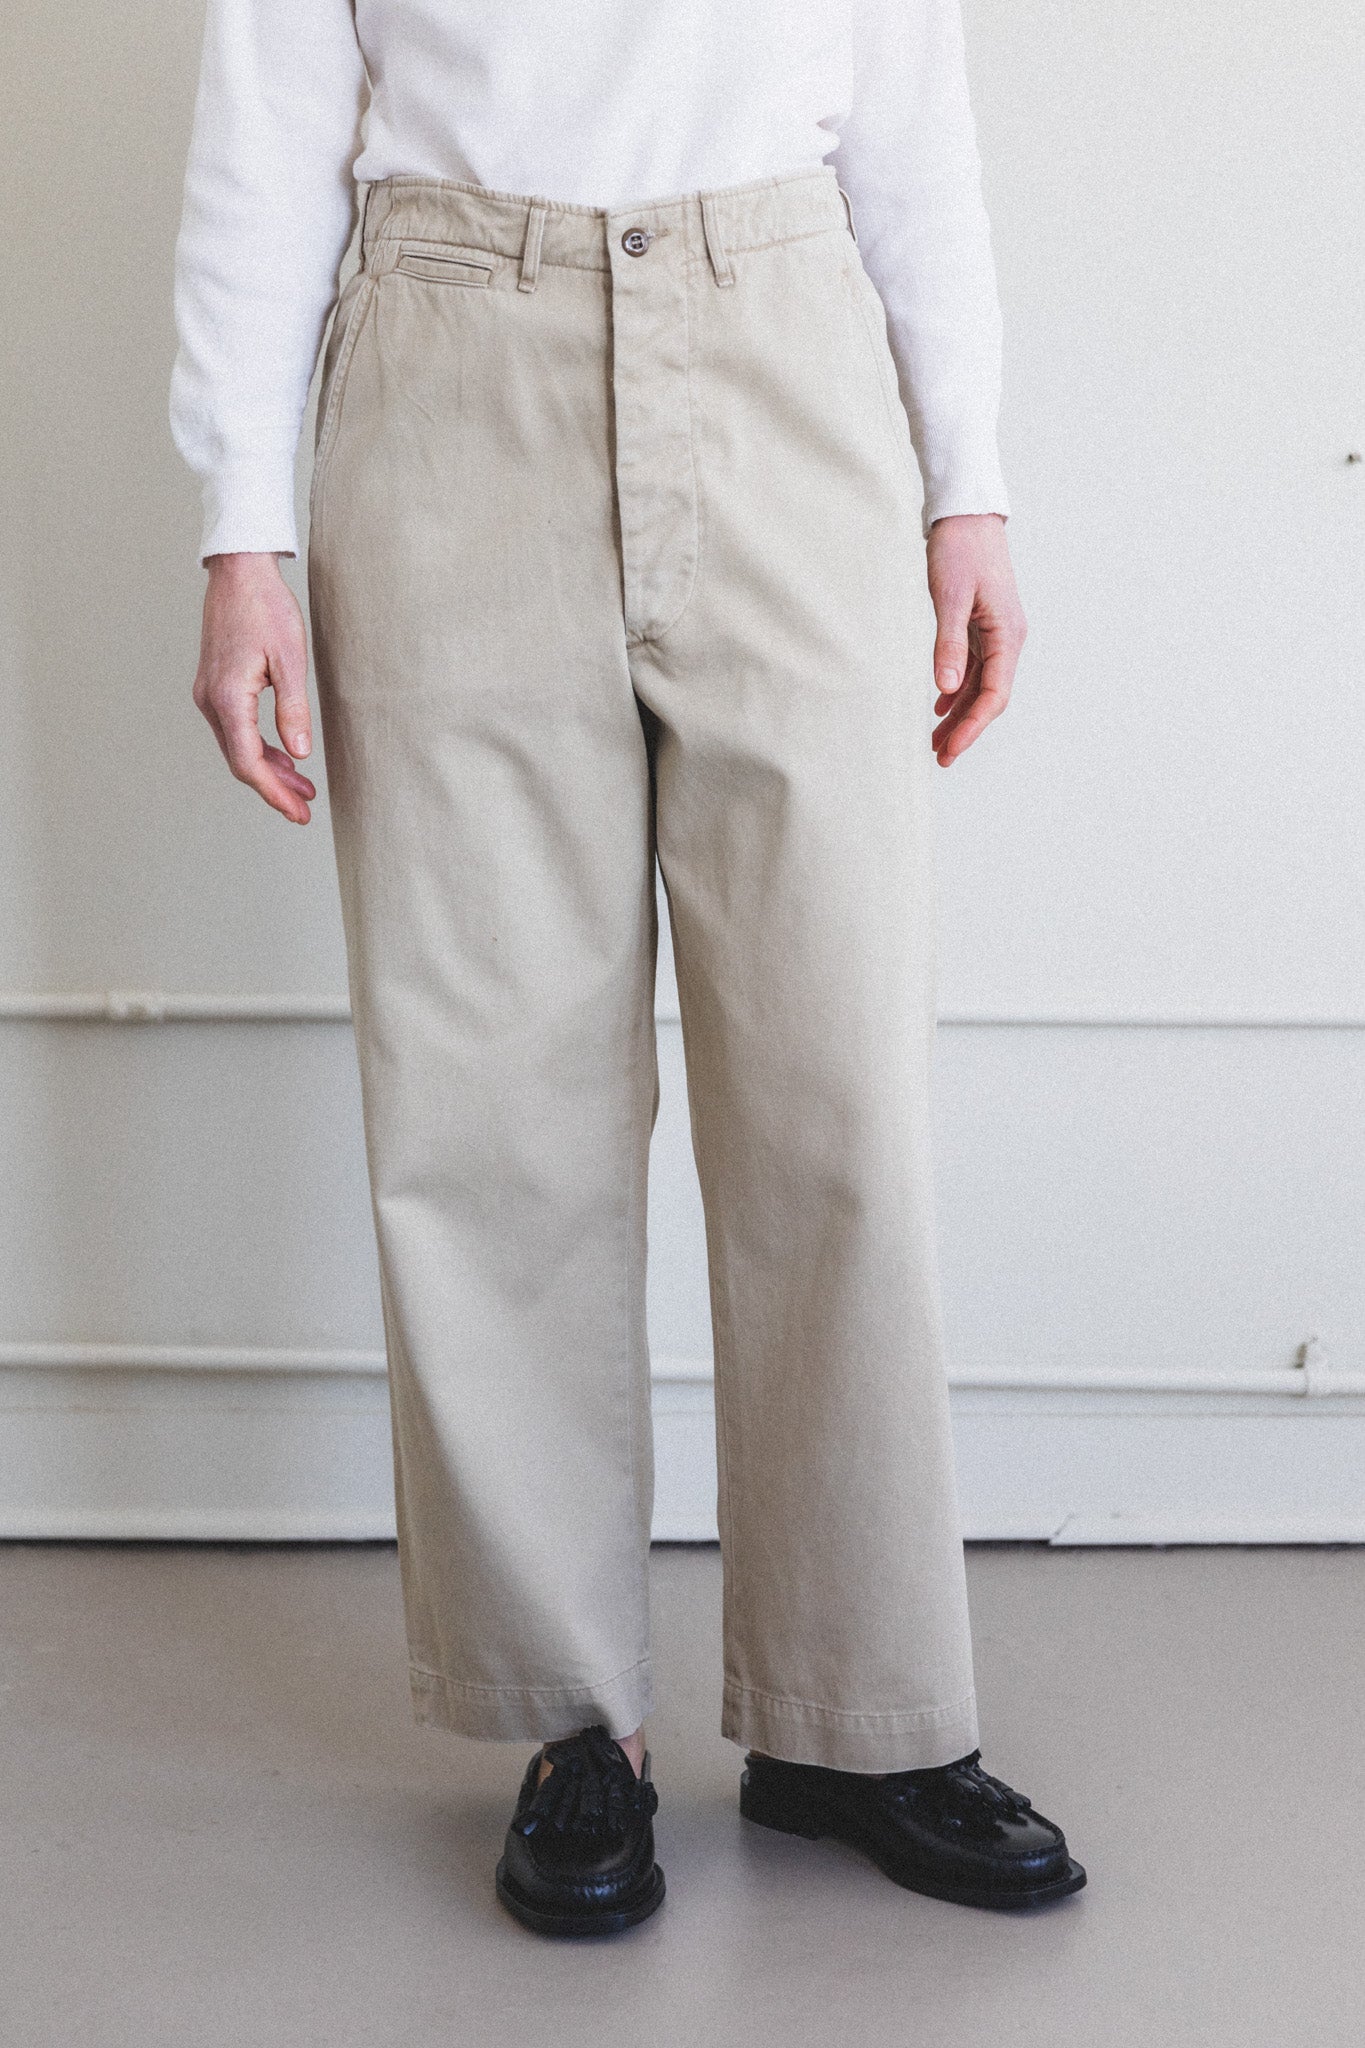 VINTAGE FIT ARMY TROUSER IN STONE WASH